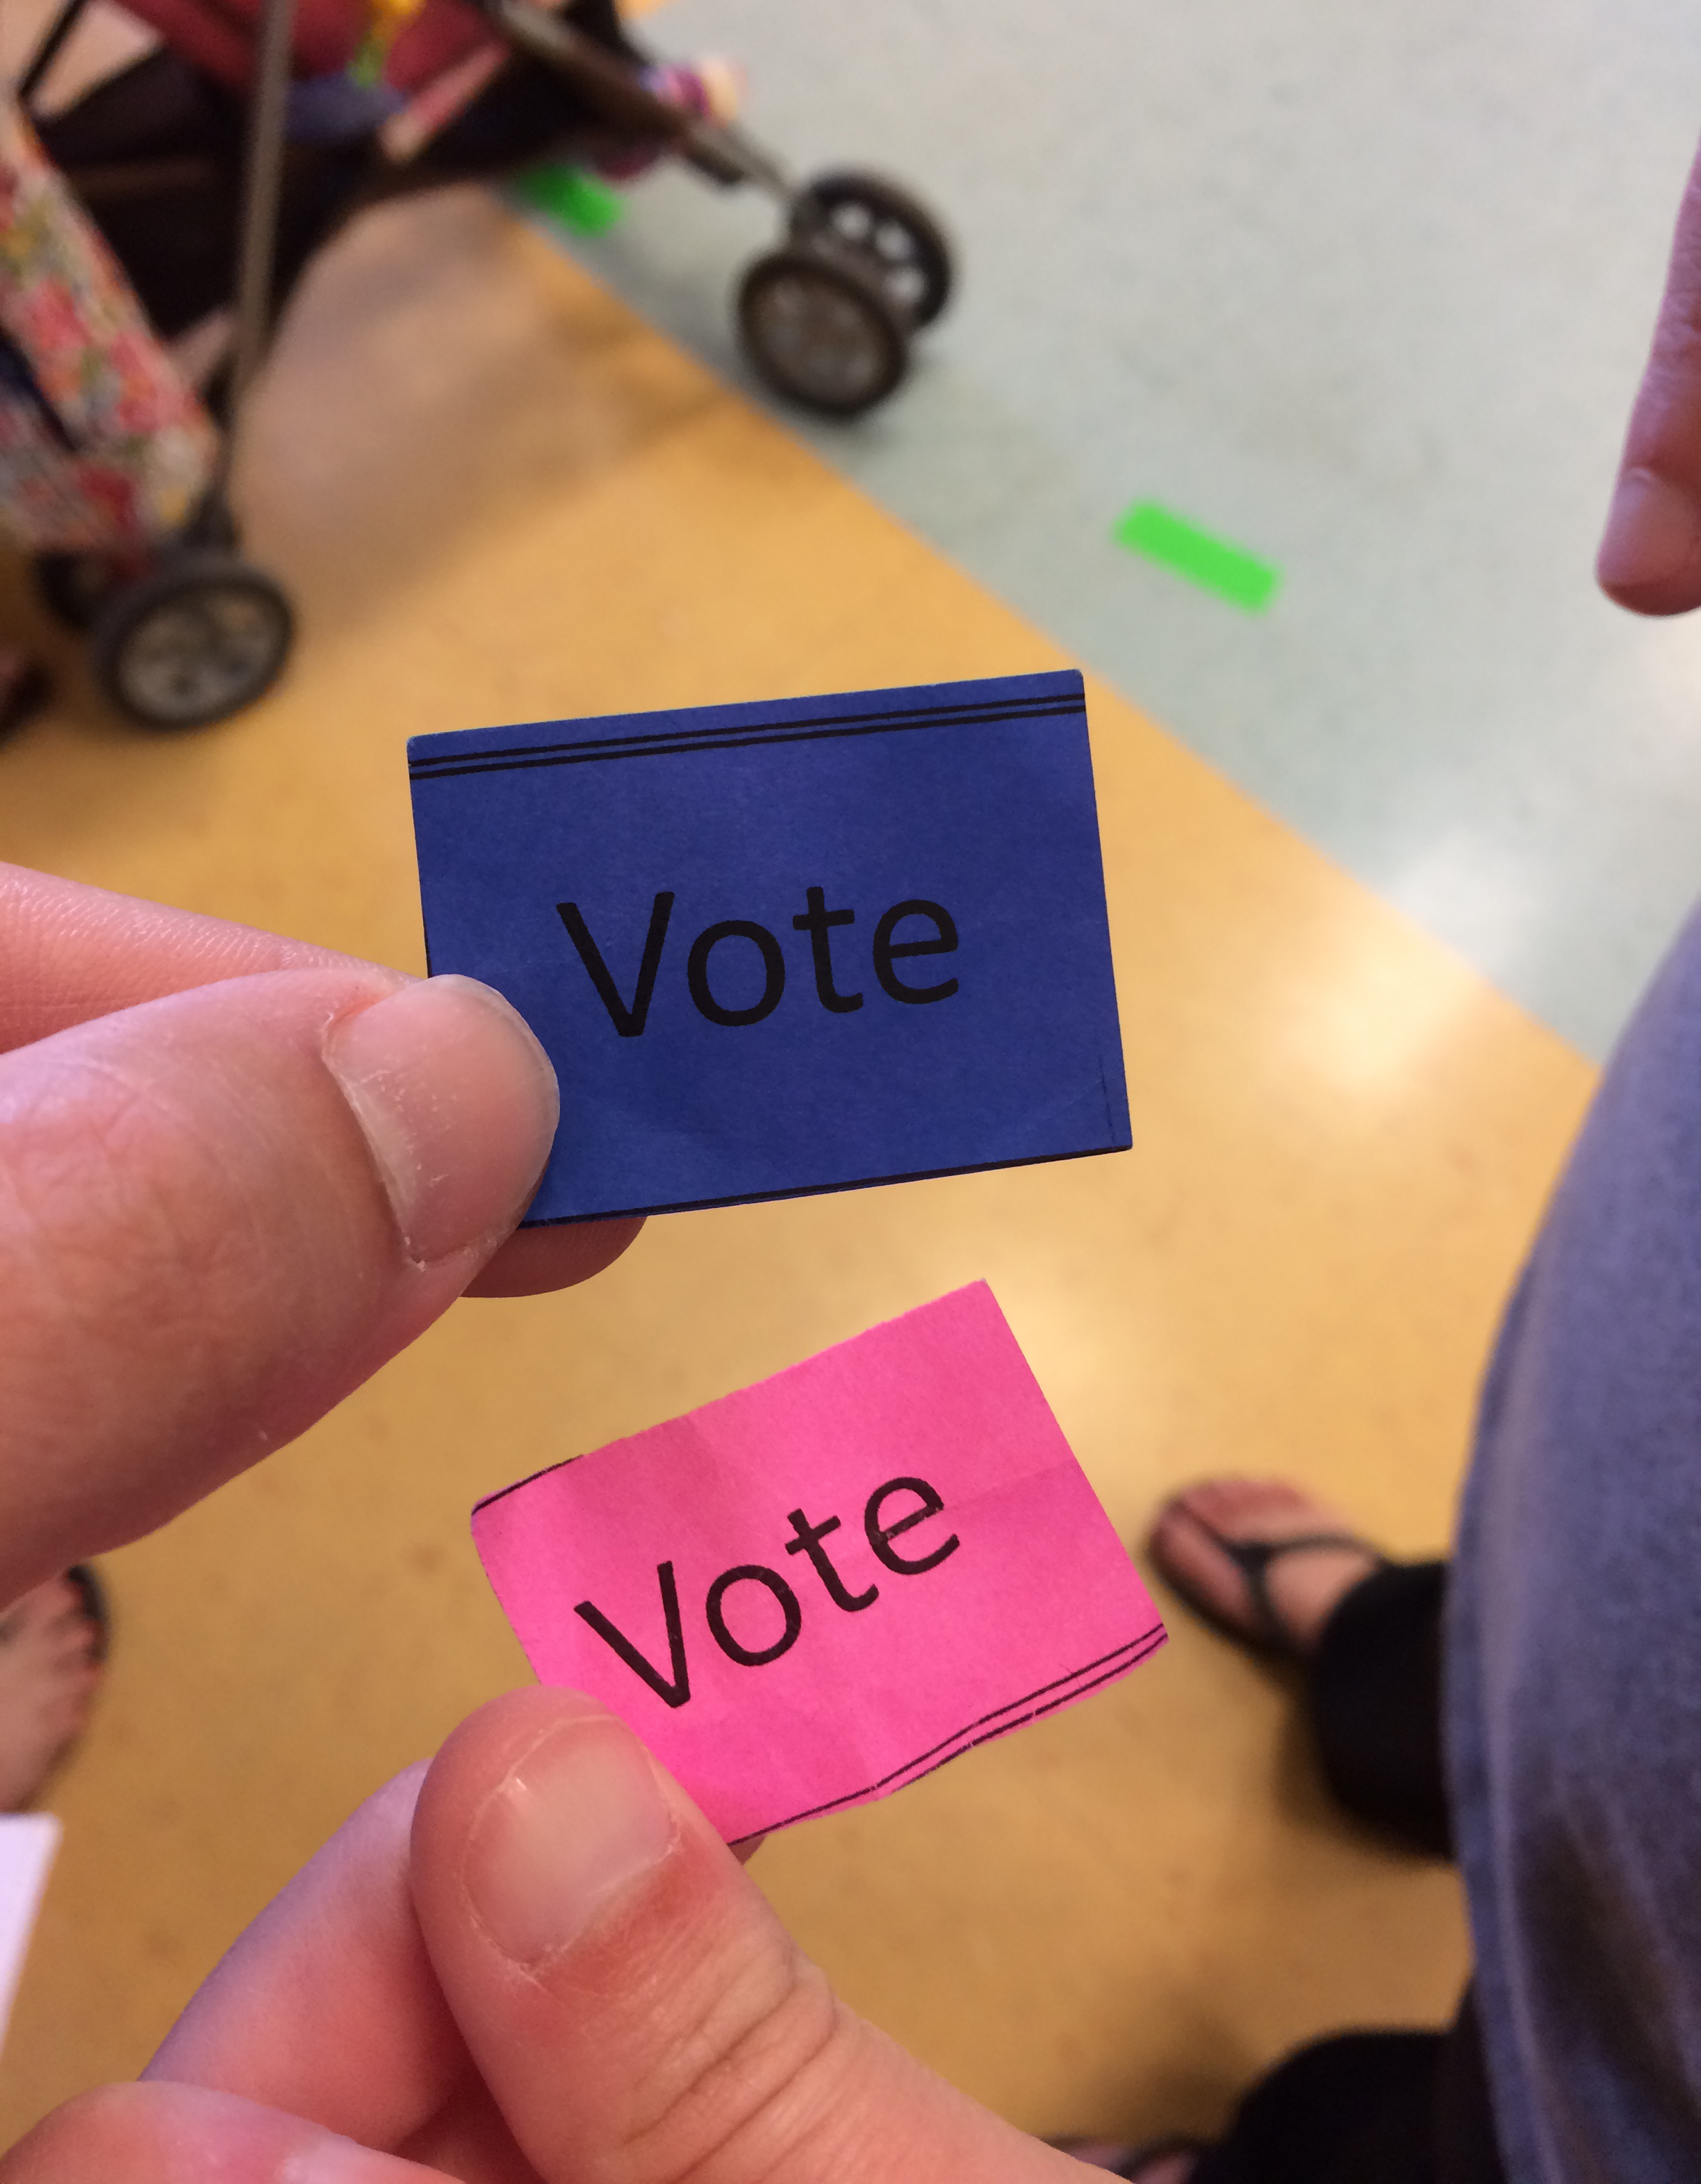 After we checked in at the voting precinct, we were given these little "vote" cards that we eventually would give to the voting official at the front of the line.